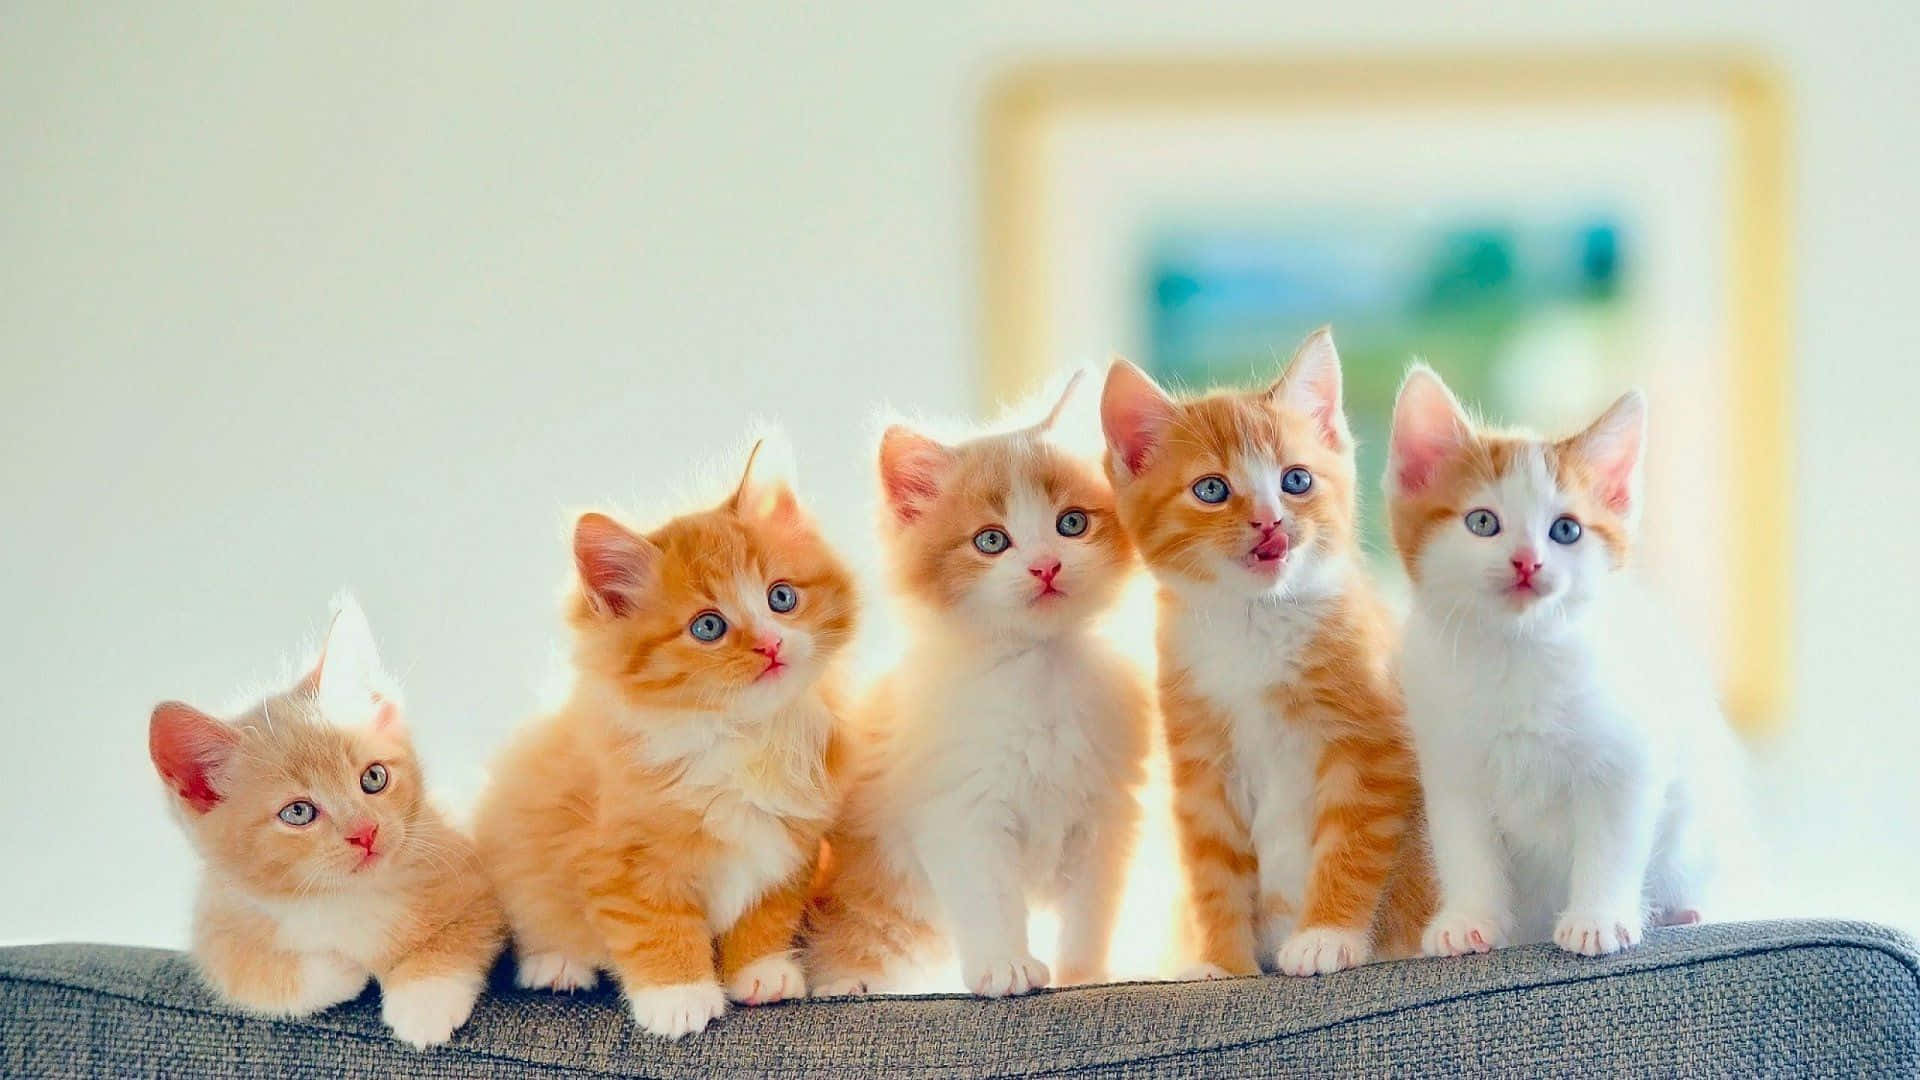 A Group Of Kittens Sitting On A Couch